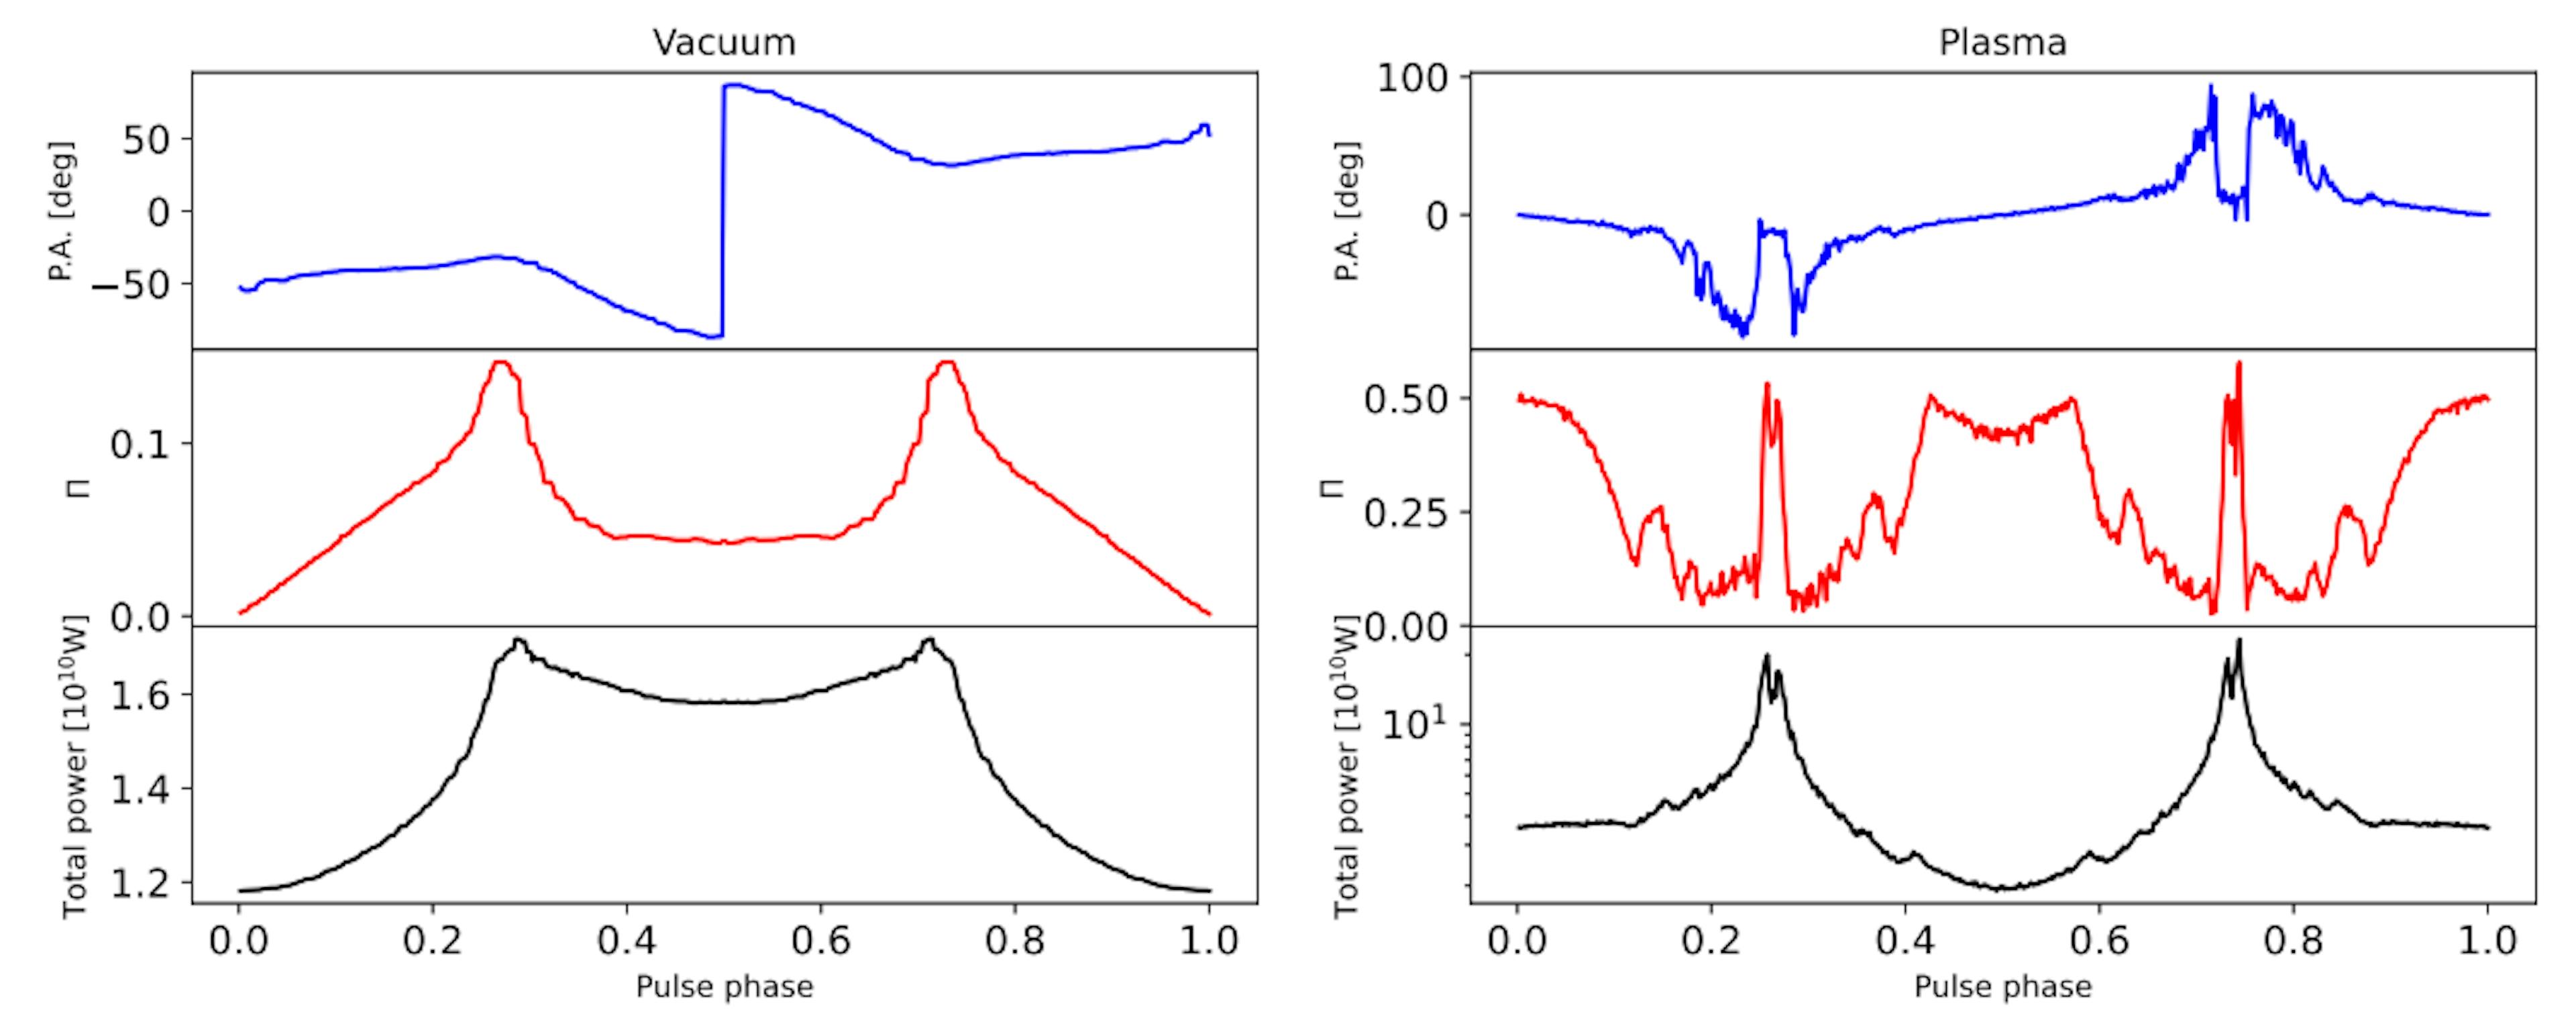 FIG. 3. Axion-induced radio emission as a function of pulse phases: vacuum versus plasma. This figure is the same as Fig. 2,only with a different viewing angle of 54◦.